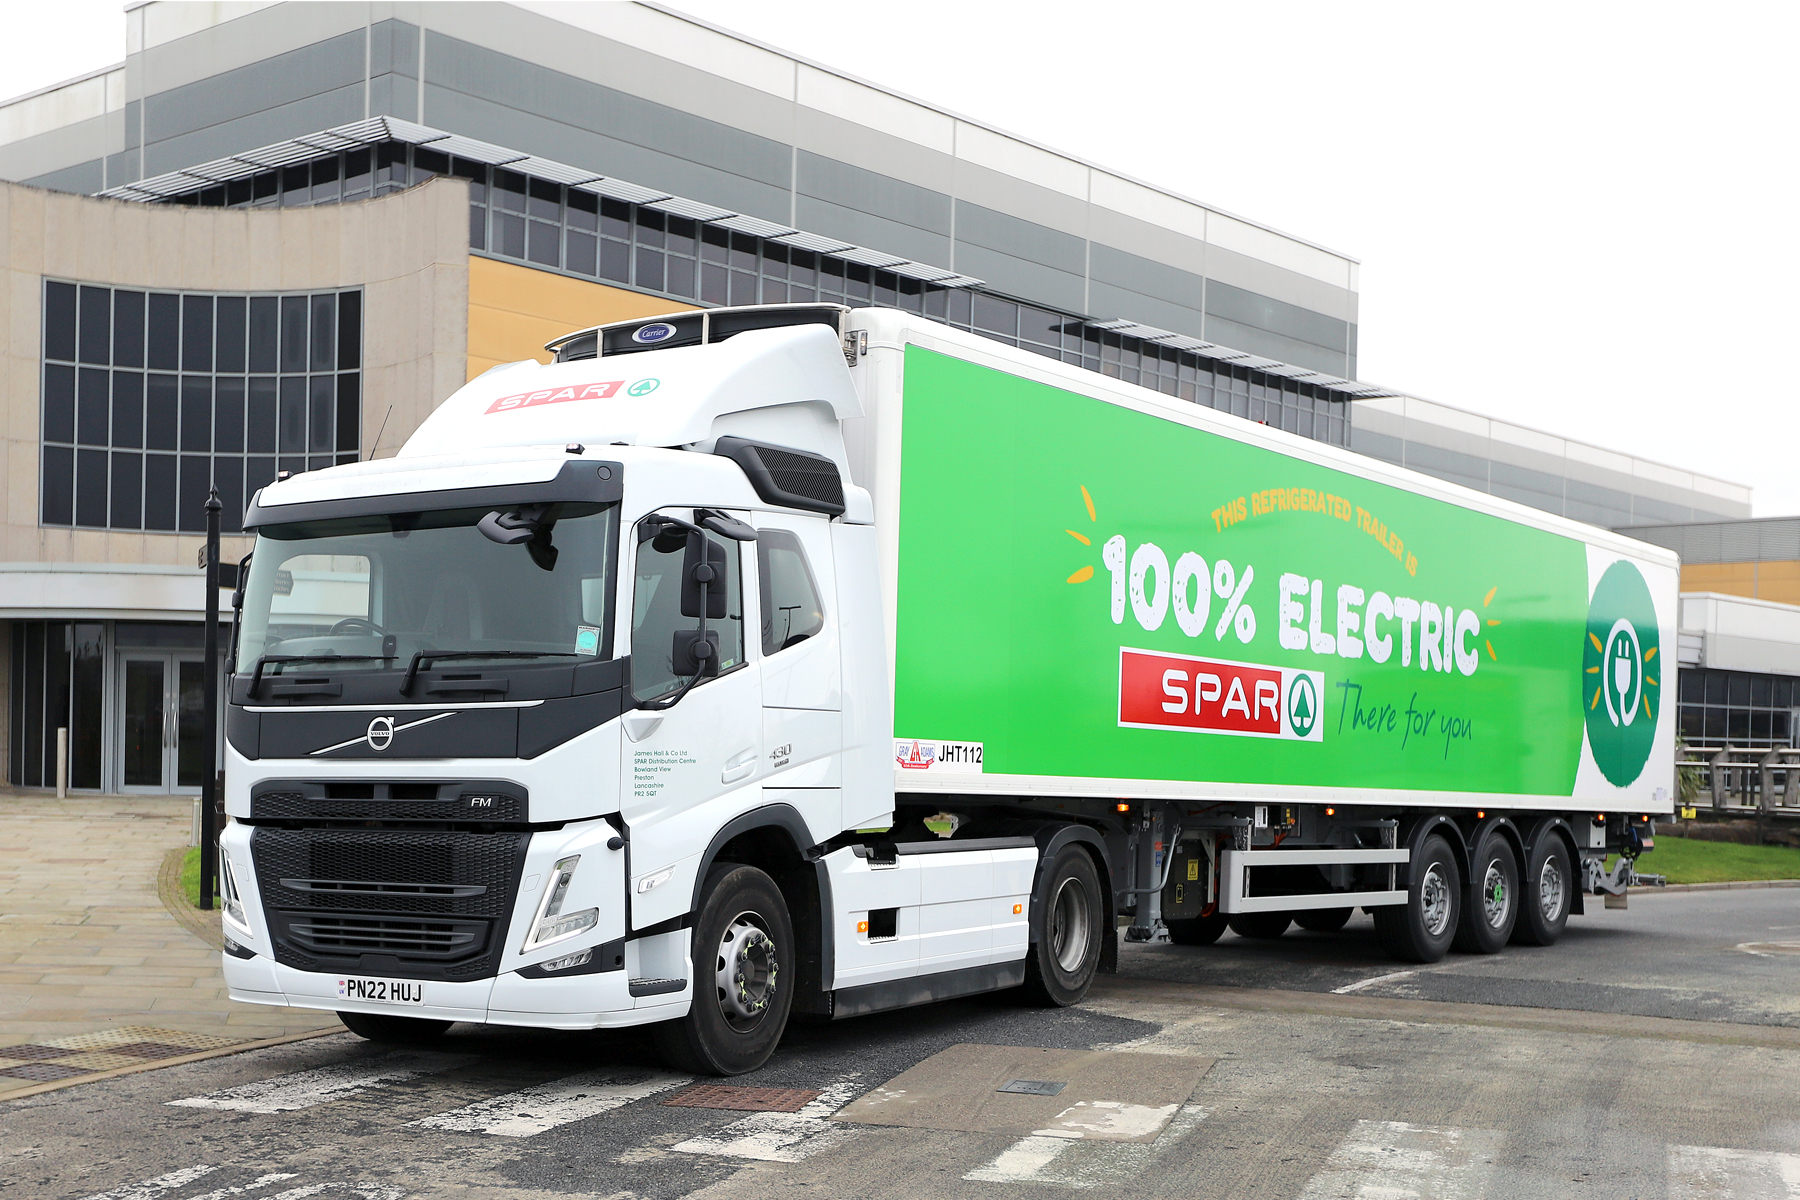 James Hall & Co takes delivery of first SPAR electric trailer